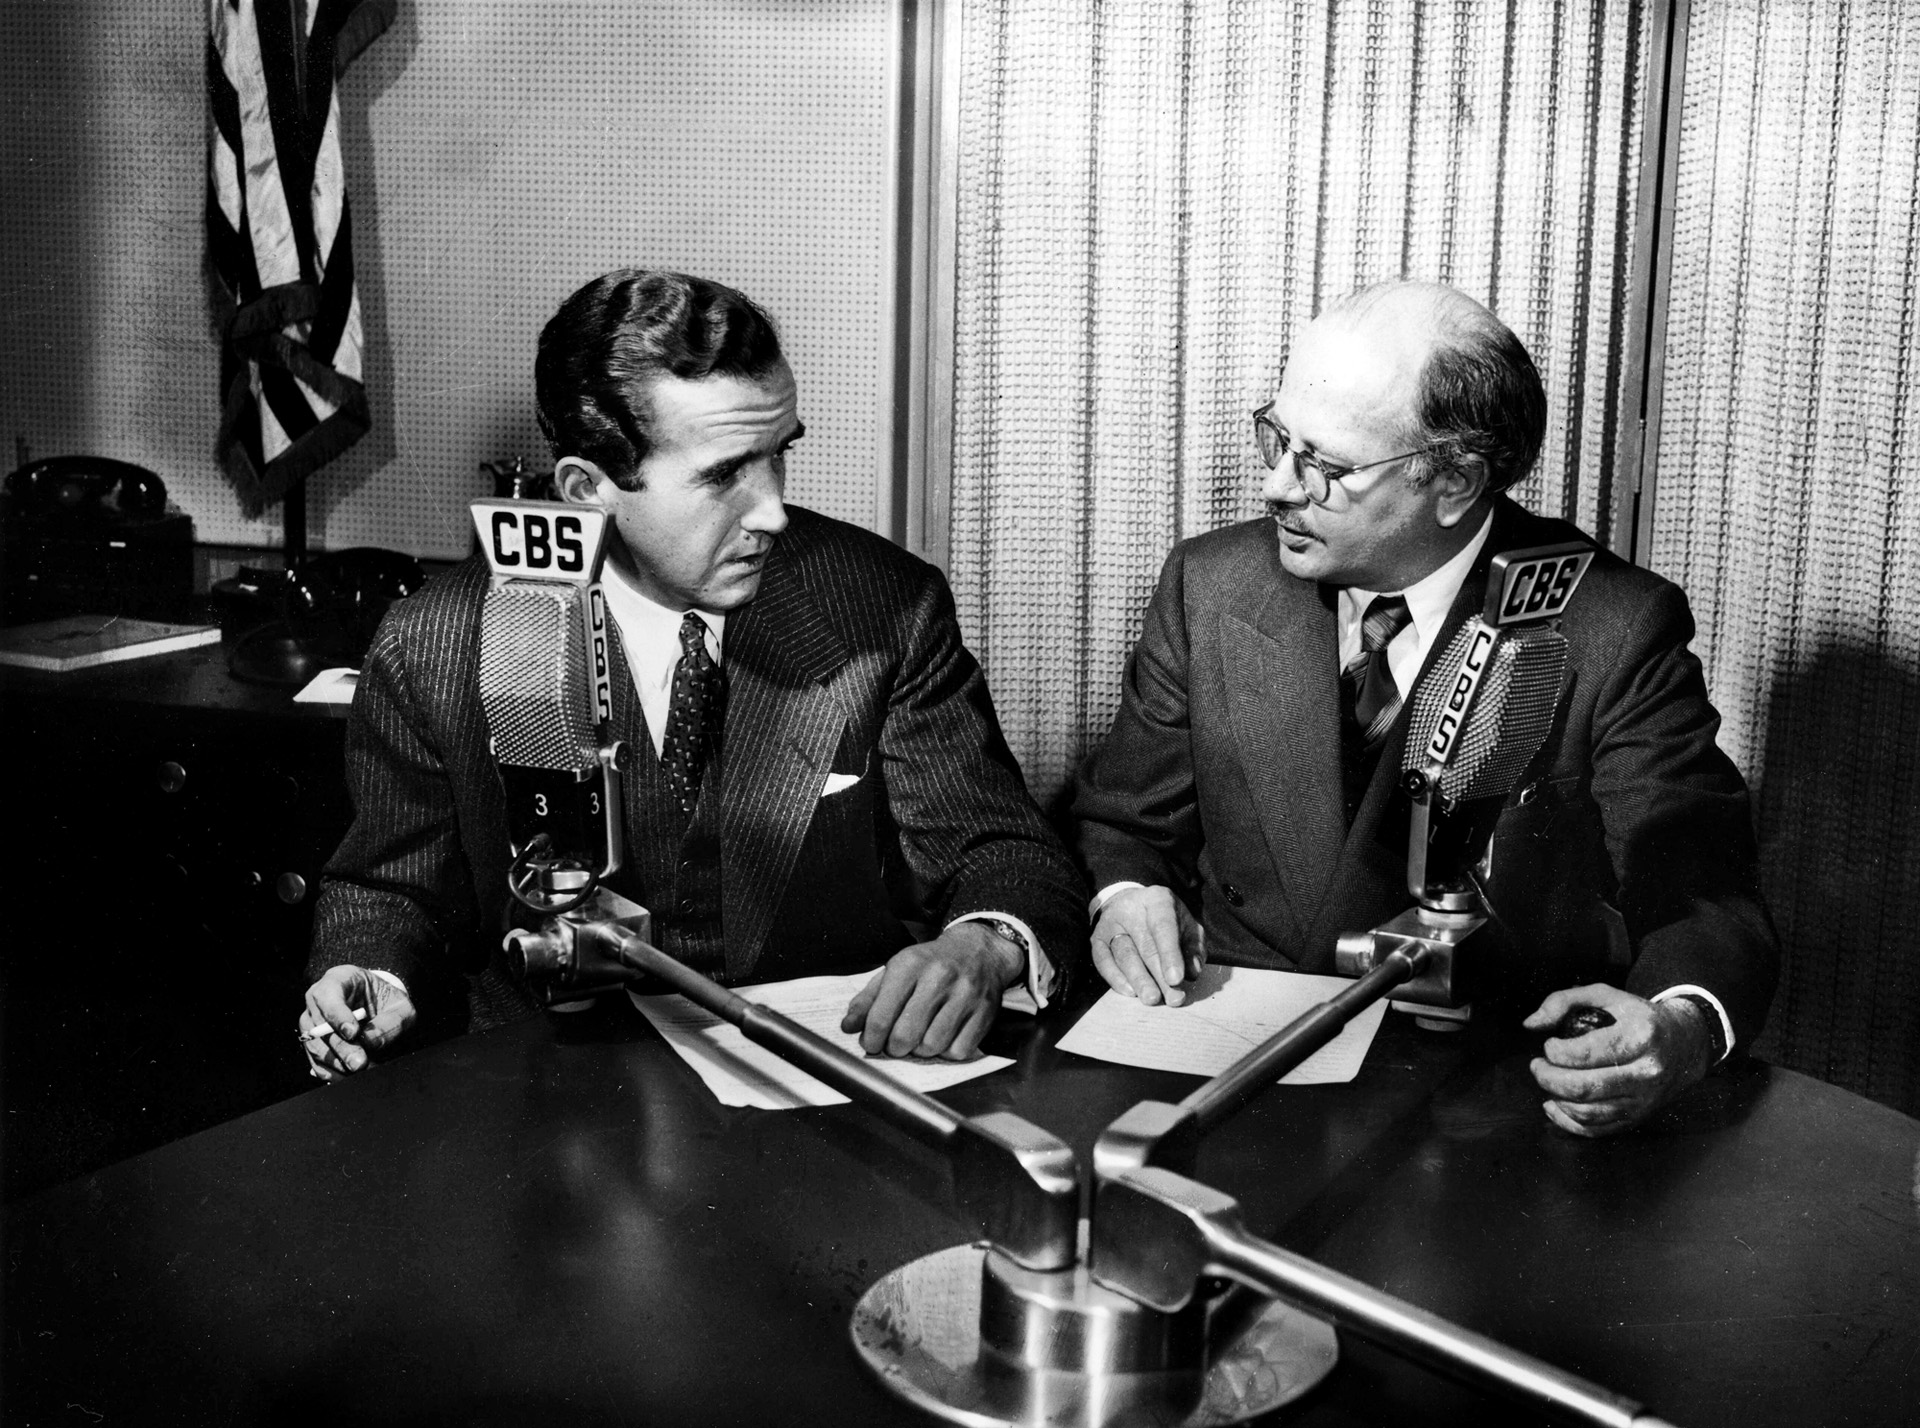 Vividly bringing the war home to America with their eyewitness accounts of the Battle of Britain and the Blitz were famed CBS broadcasters Edward R. Murrow (left) and William L. Shirer, shown here in their London studio. Their sympathetic accounts caused many Americans to rethink their stance of strict U.S. neutrality.